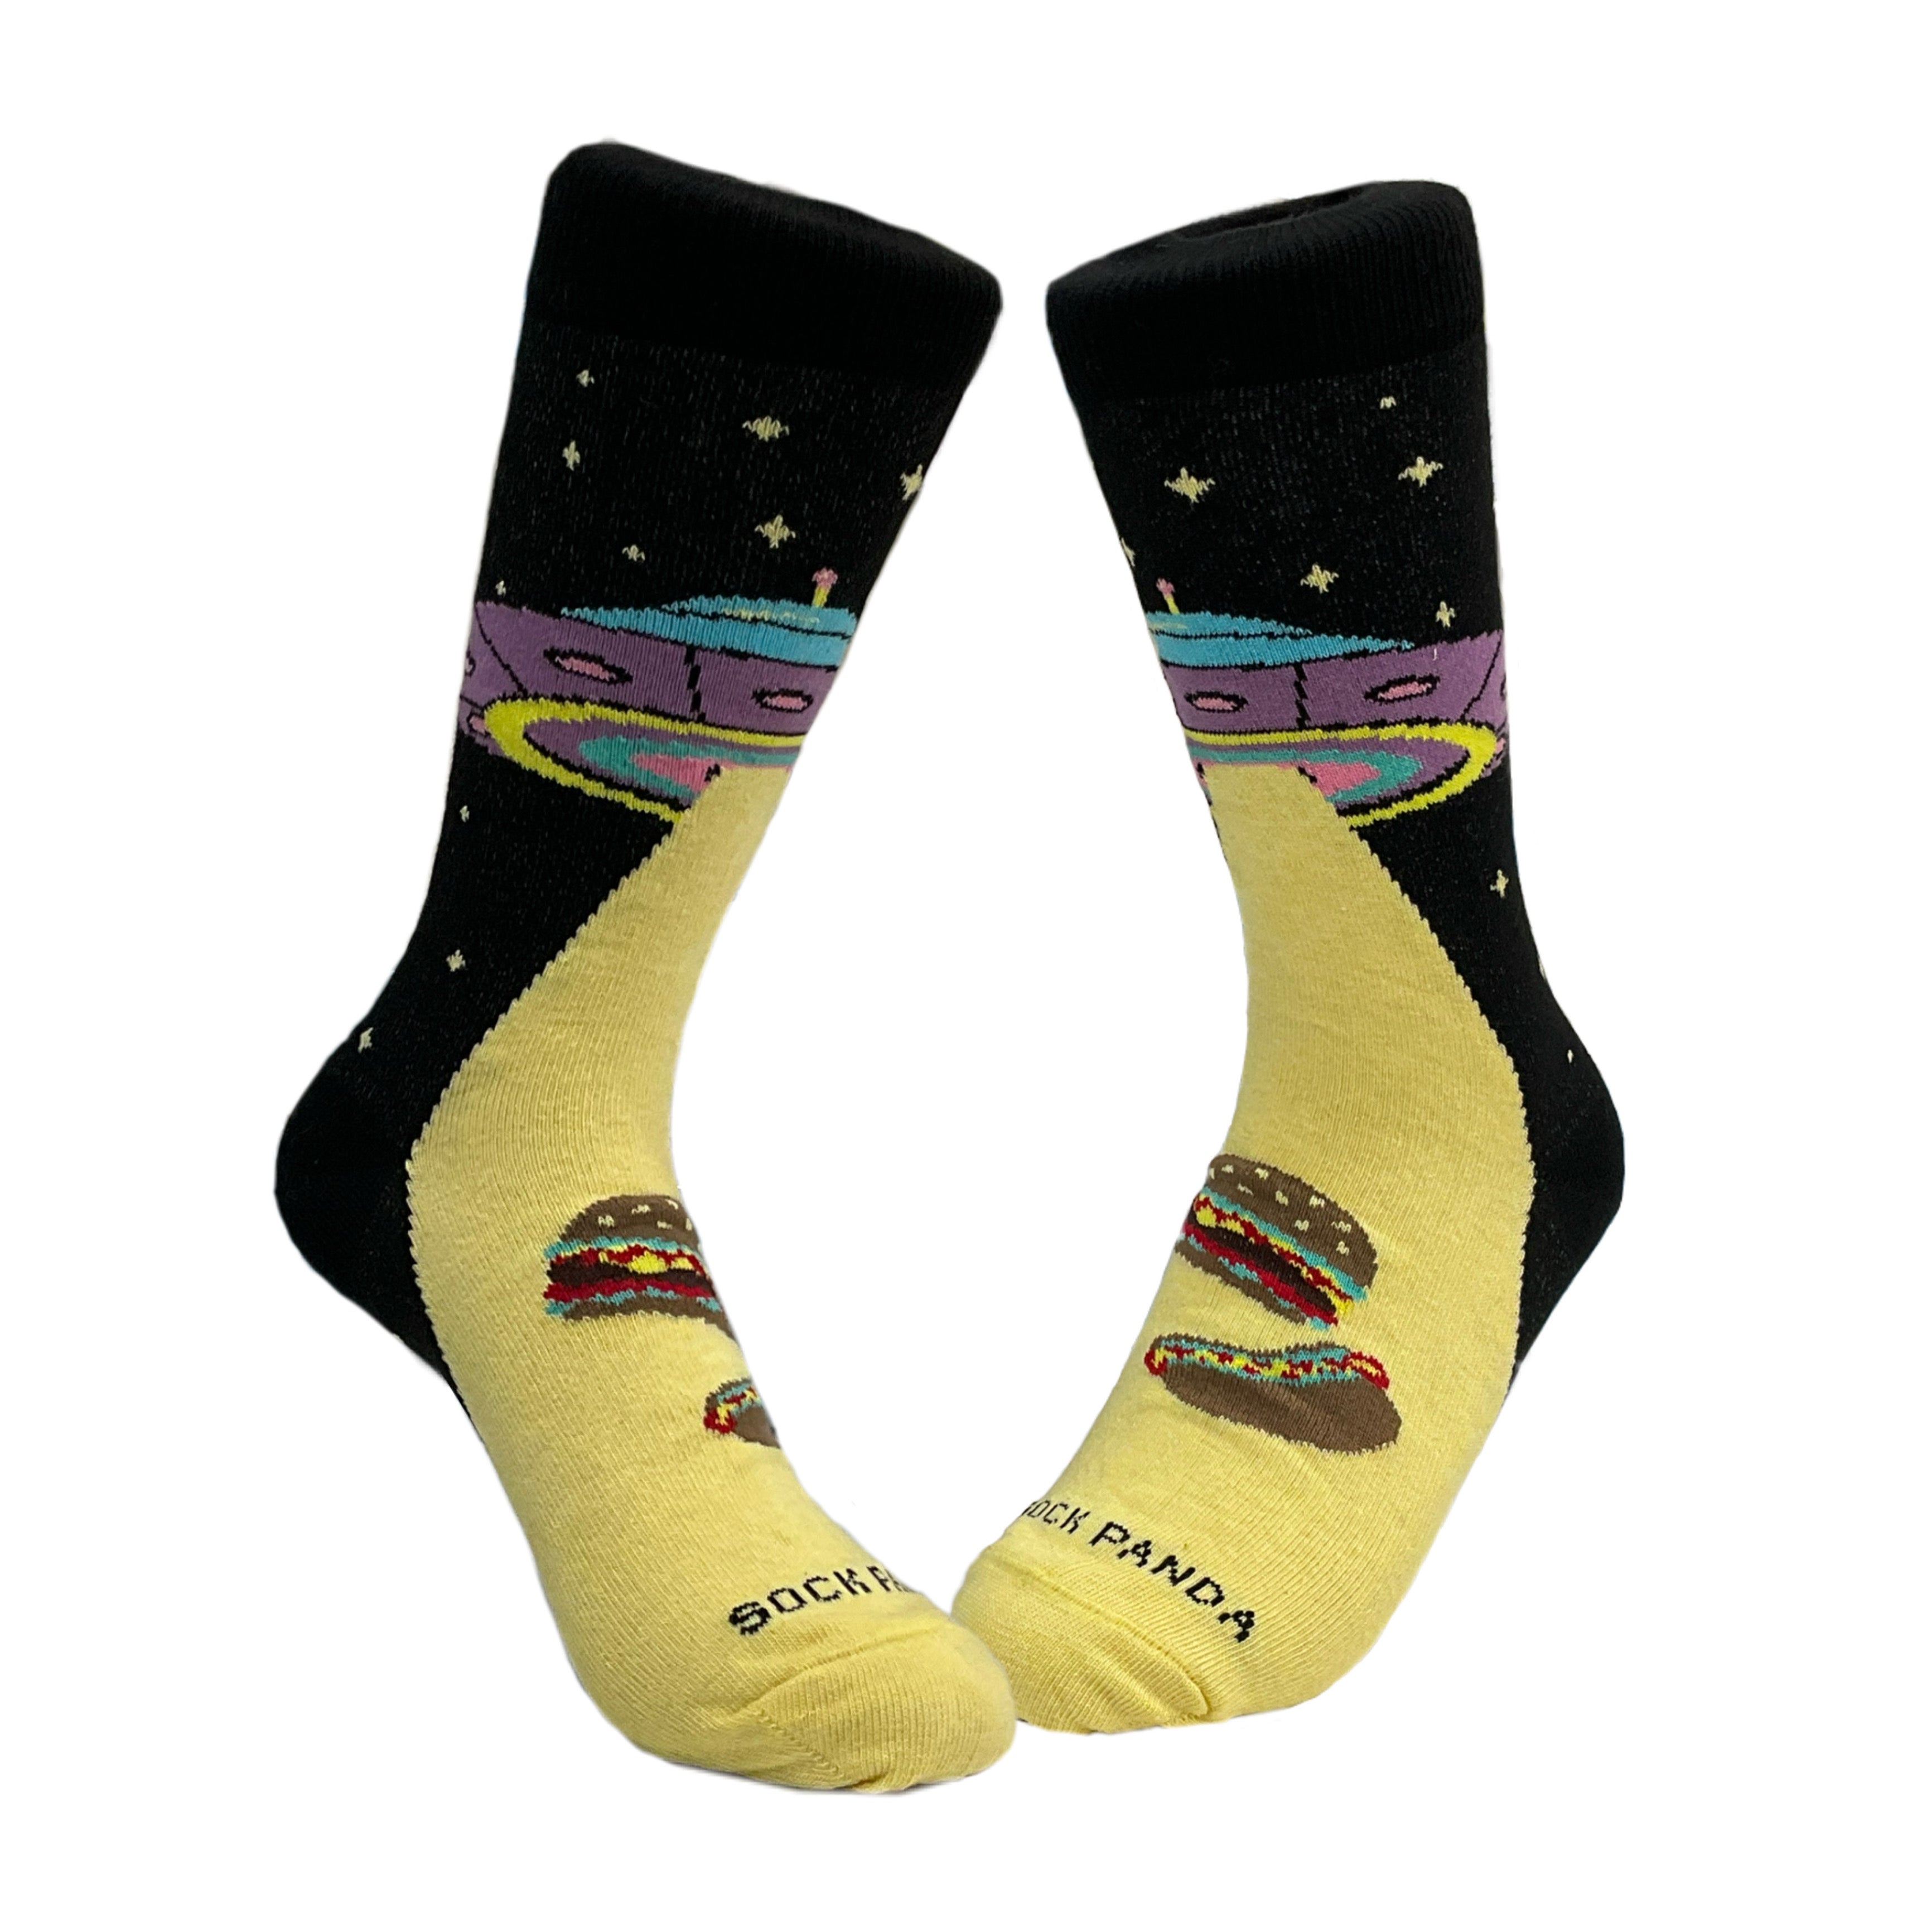 UFO's are Real - Aliens Are Taking Our Leaders Socks (Adult Small)